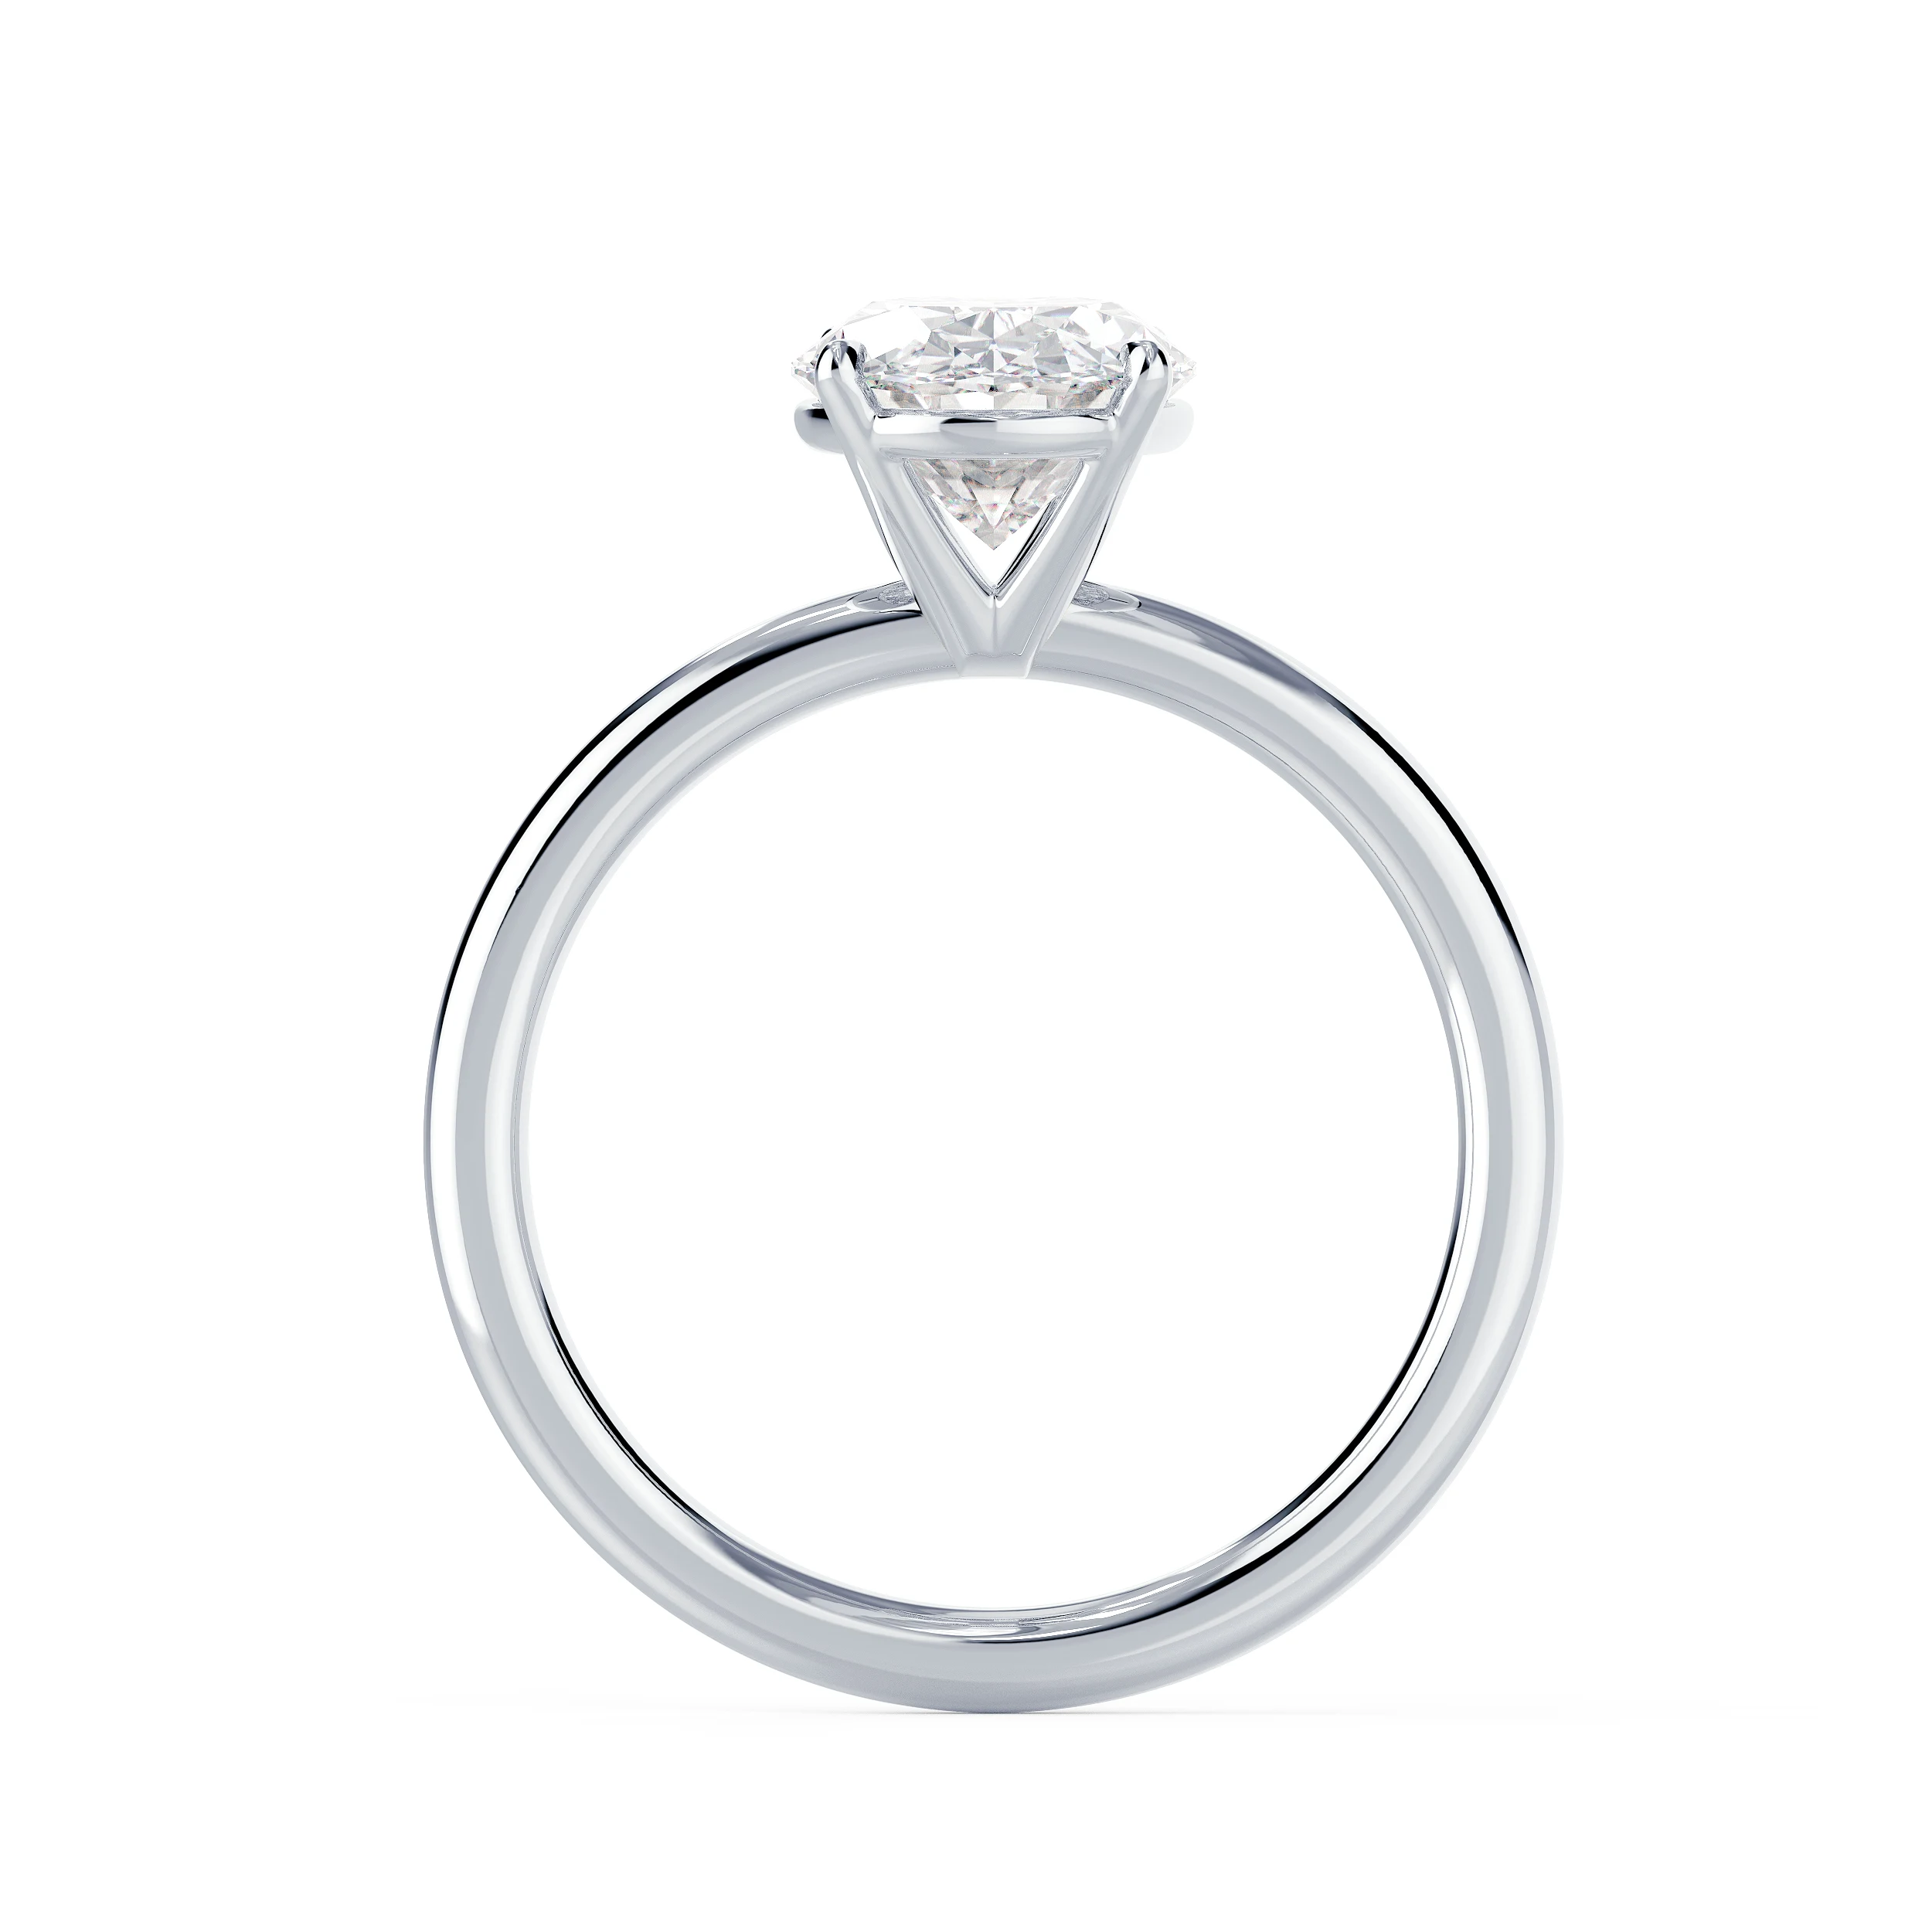 White Gold Oval Petite Four Prong Solitaire featuring Exceptional Quality Lab Diamonds (Profile View)